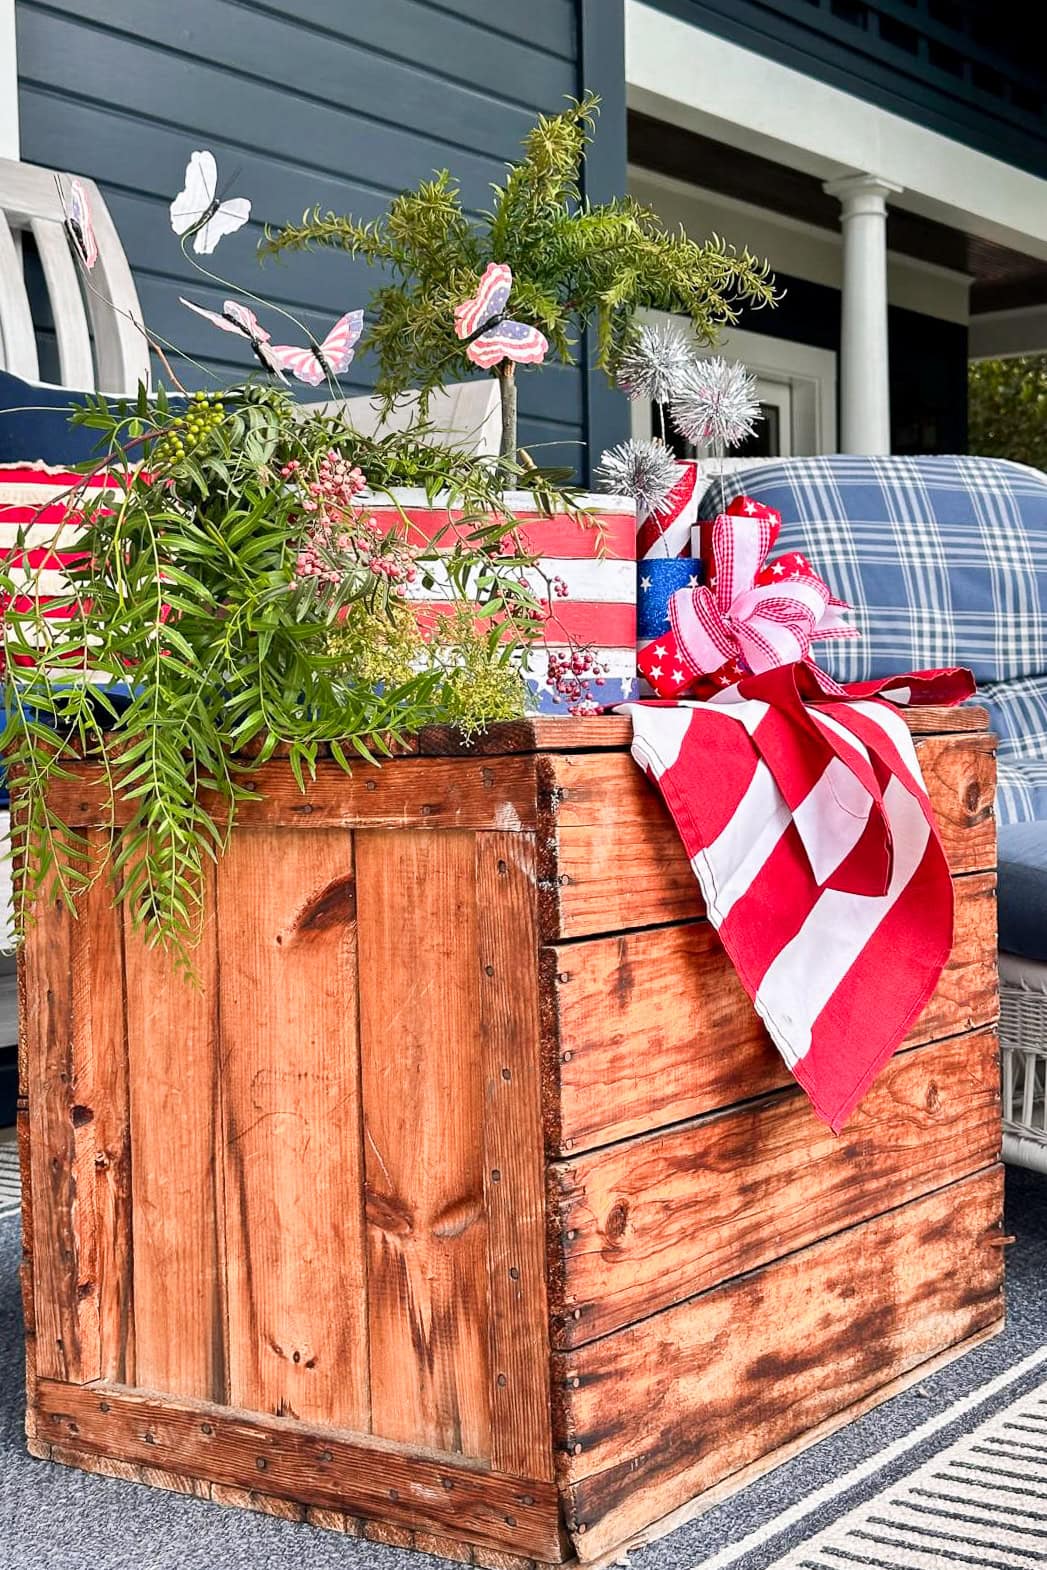 front porch side table decorated with patriotic red, white, and blue decorations and summer flowers